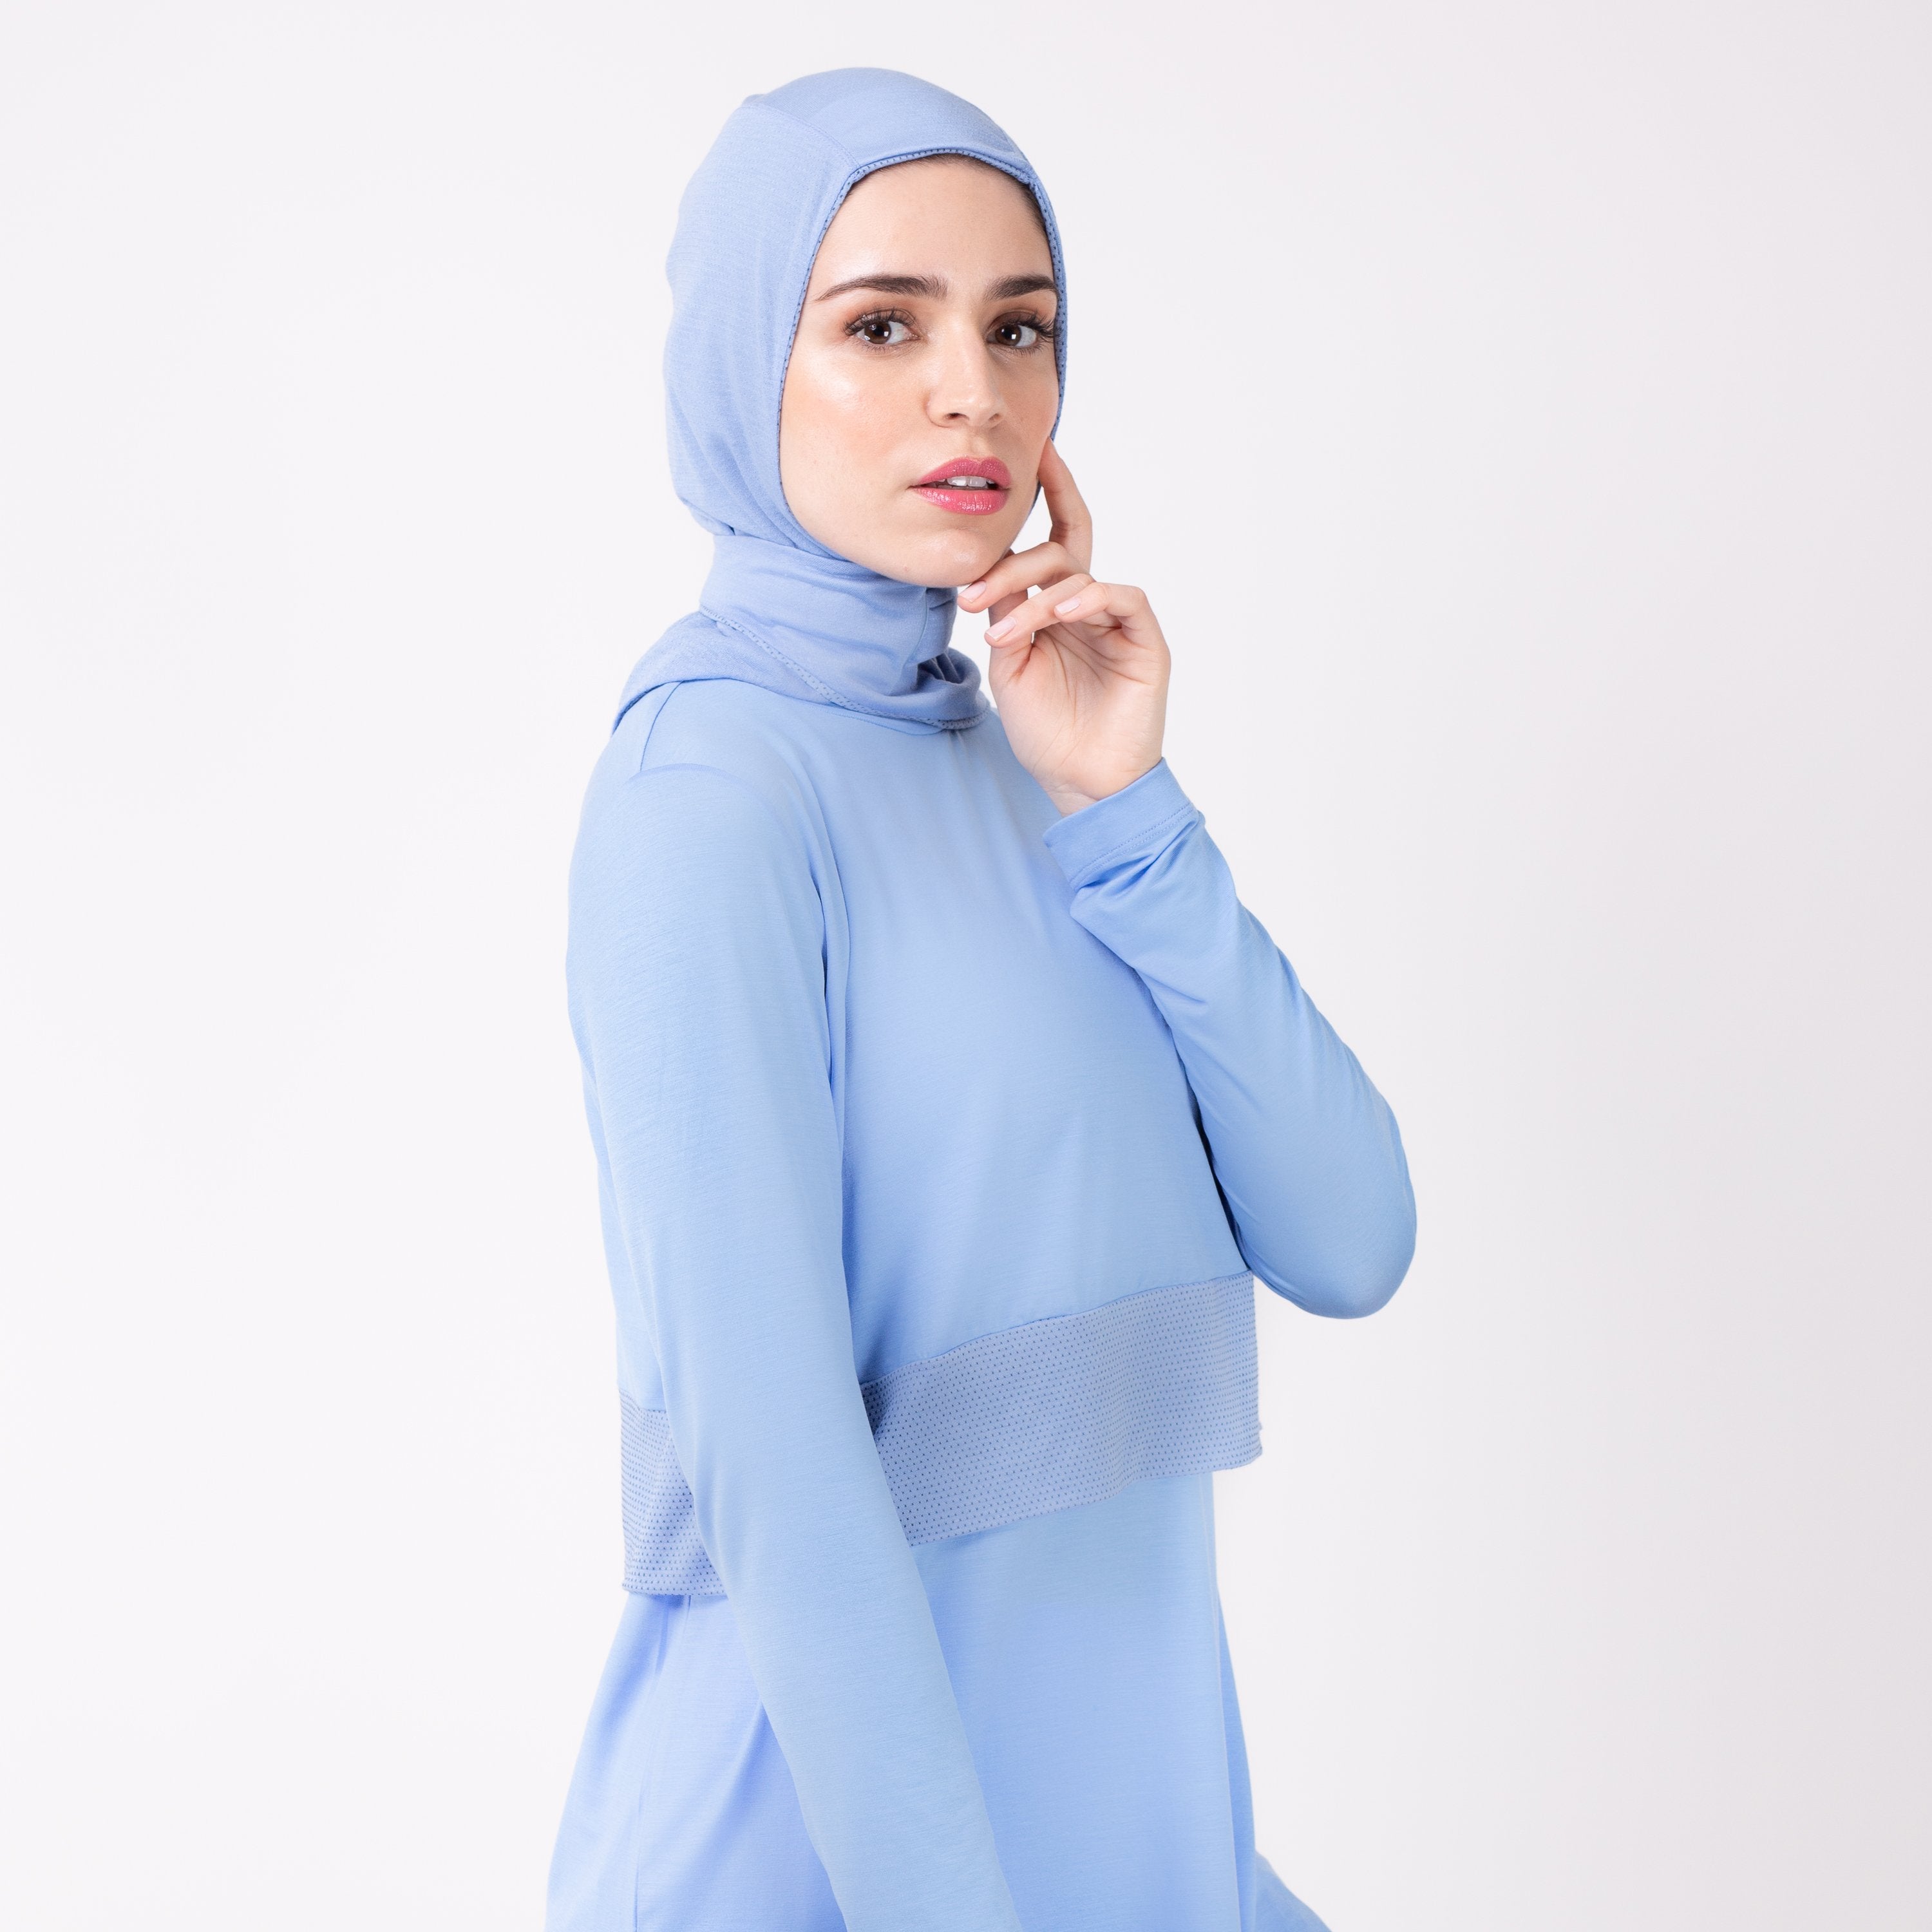 Woman facing right in a sky blue shirt with a matching sky blue HAWA hijab, touching her face with her left hand.